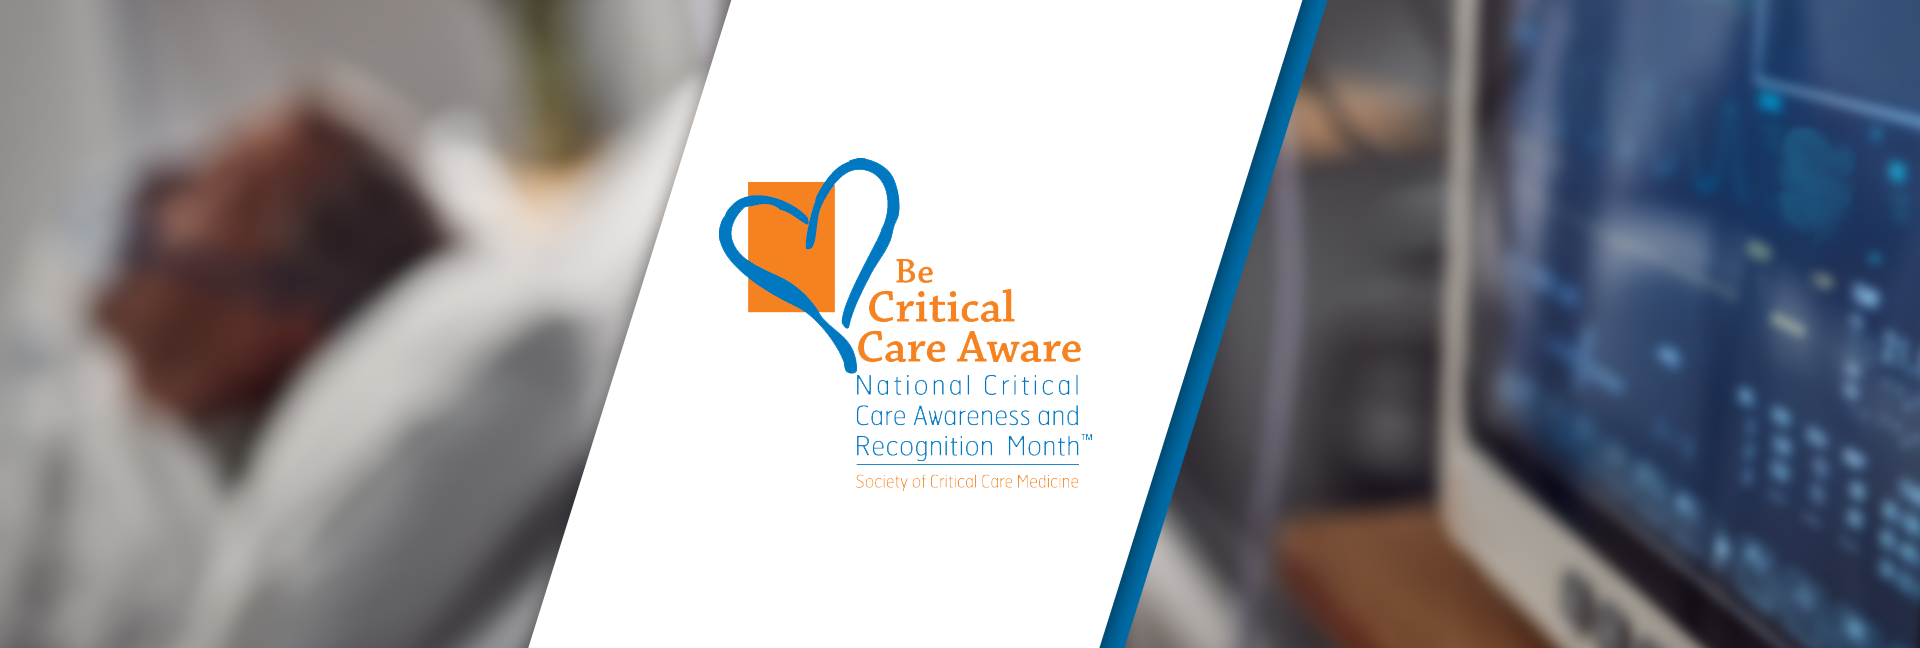 critical care awareness and recognition image